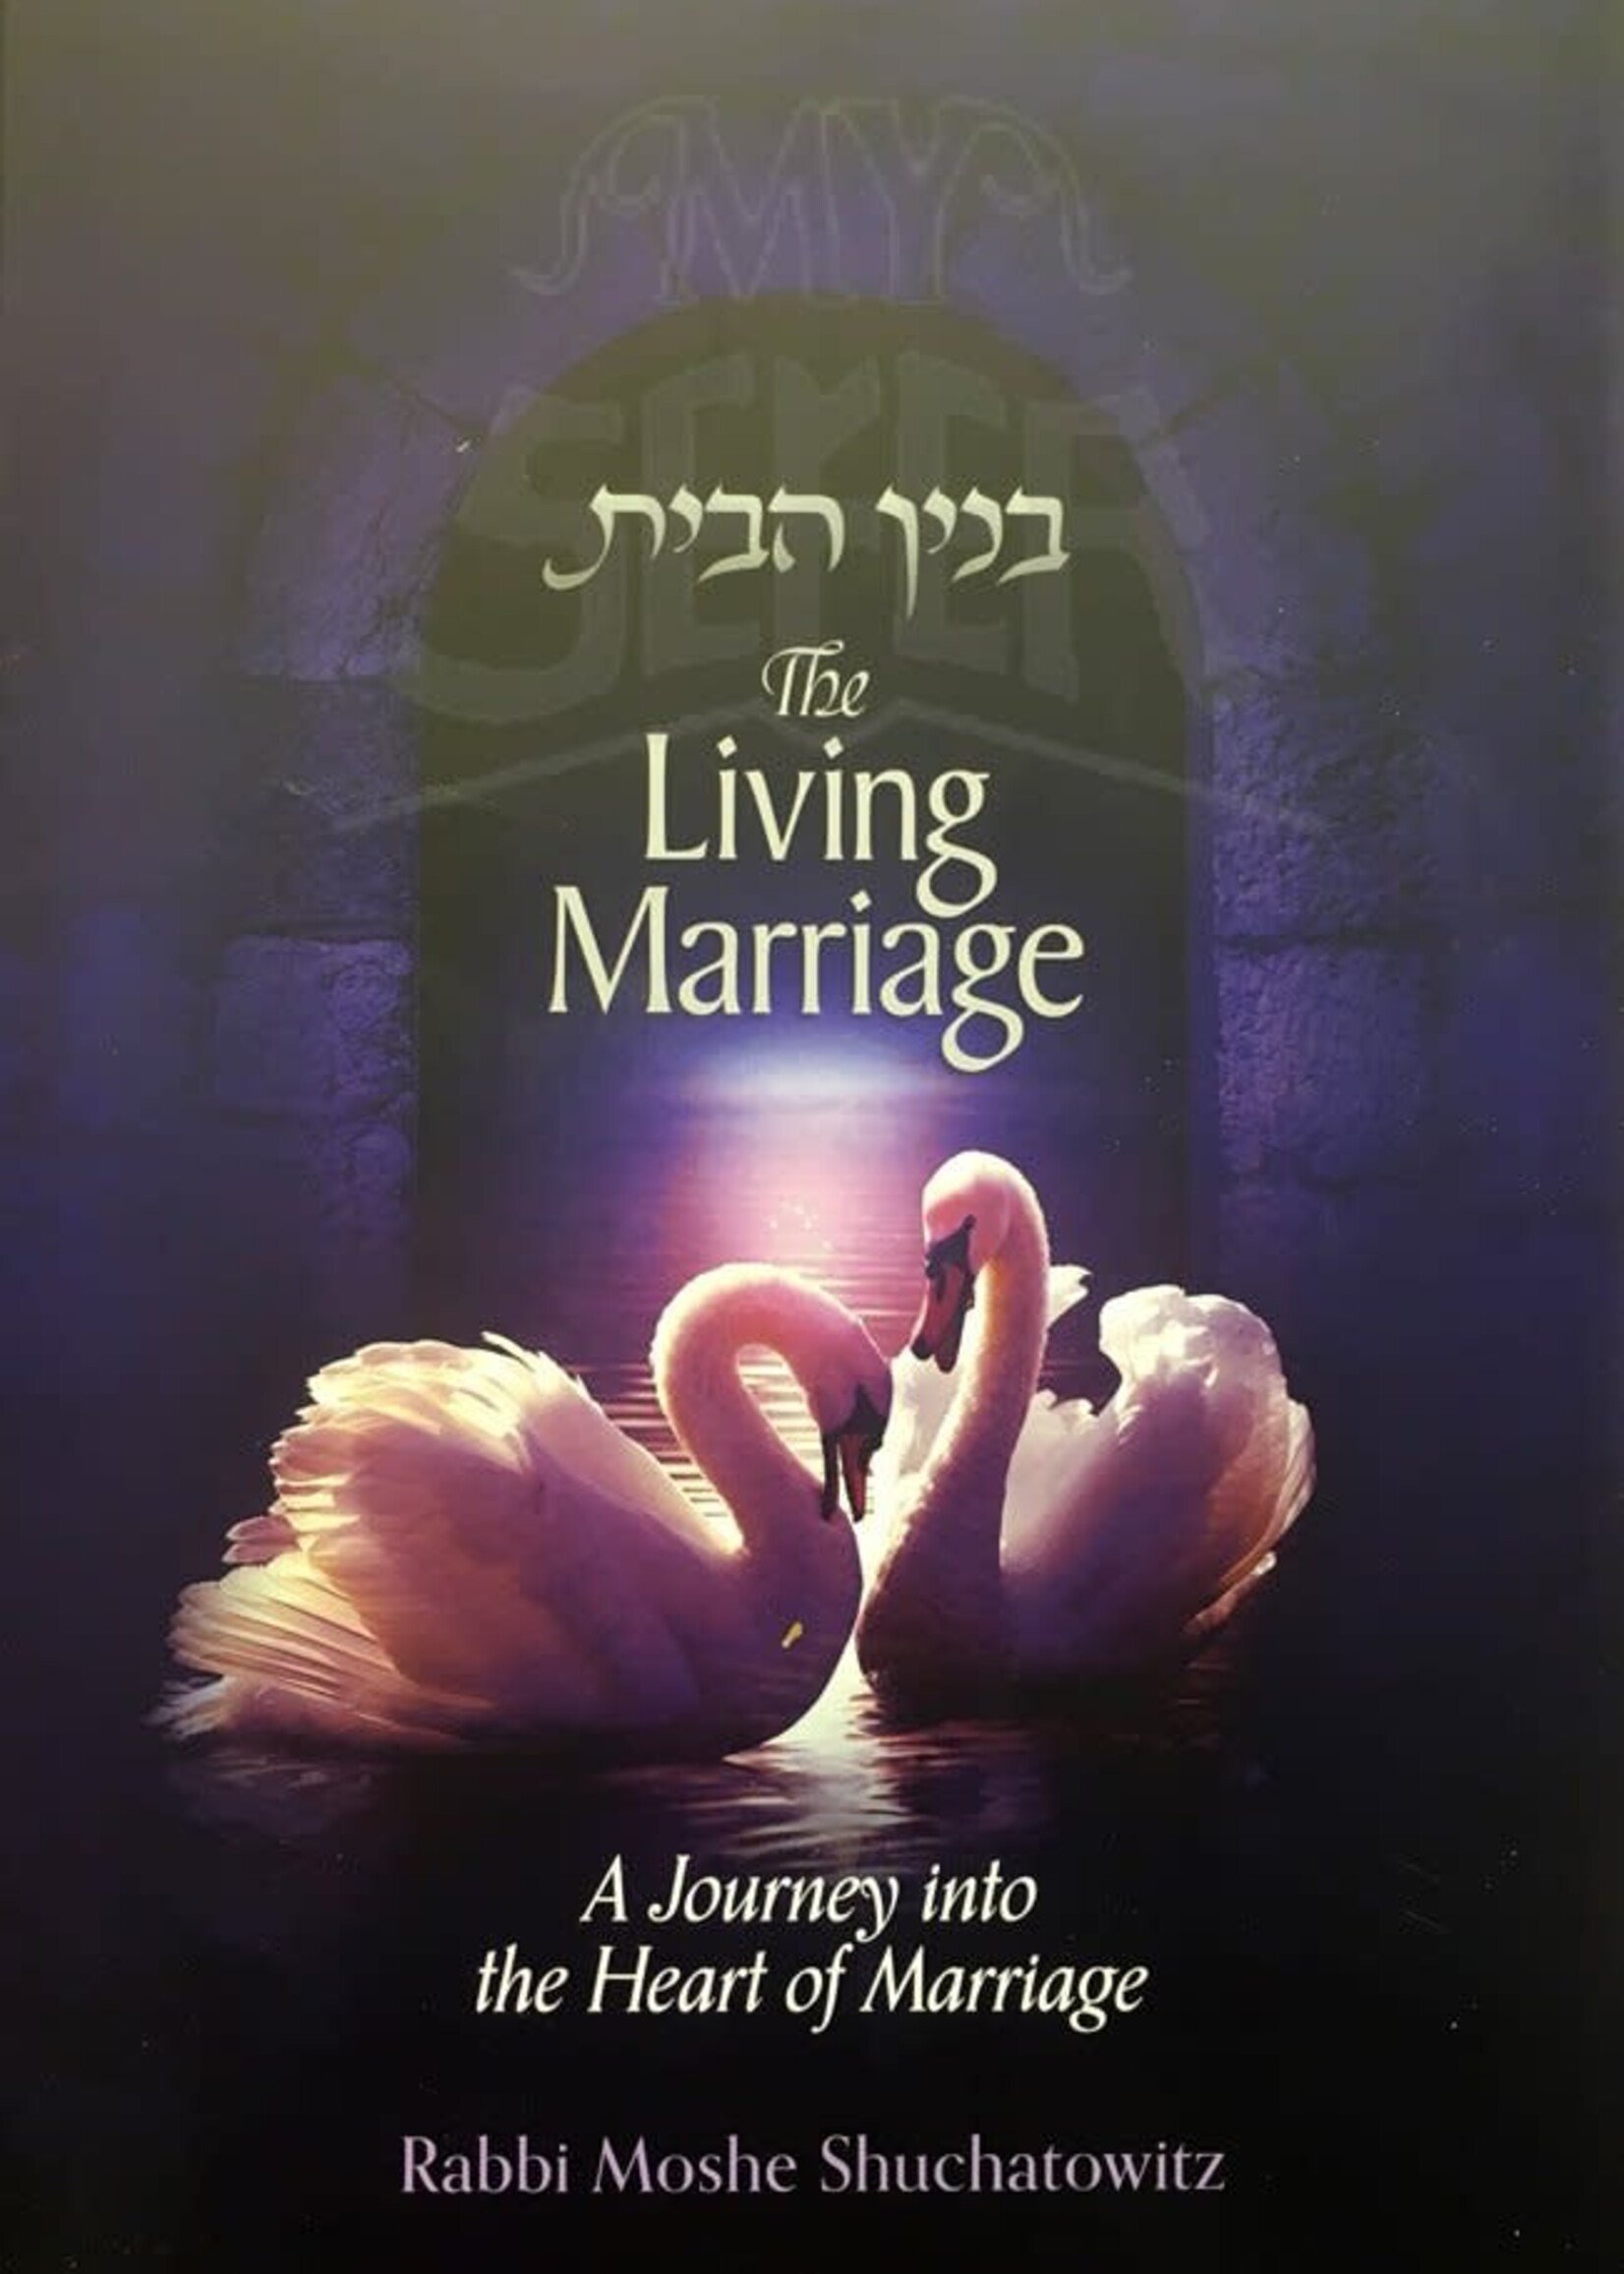 Rabbi Mendel Weiss The Living Marriage - A Journey into the Heart of Marriage (Rabbi Moshe Shuchatowitz)